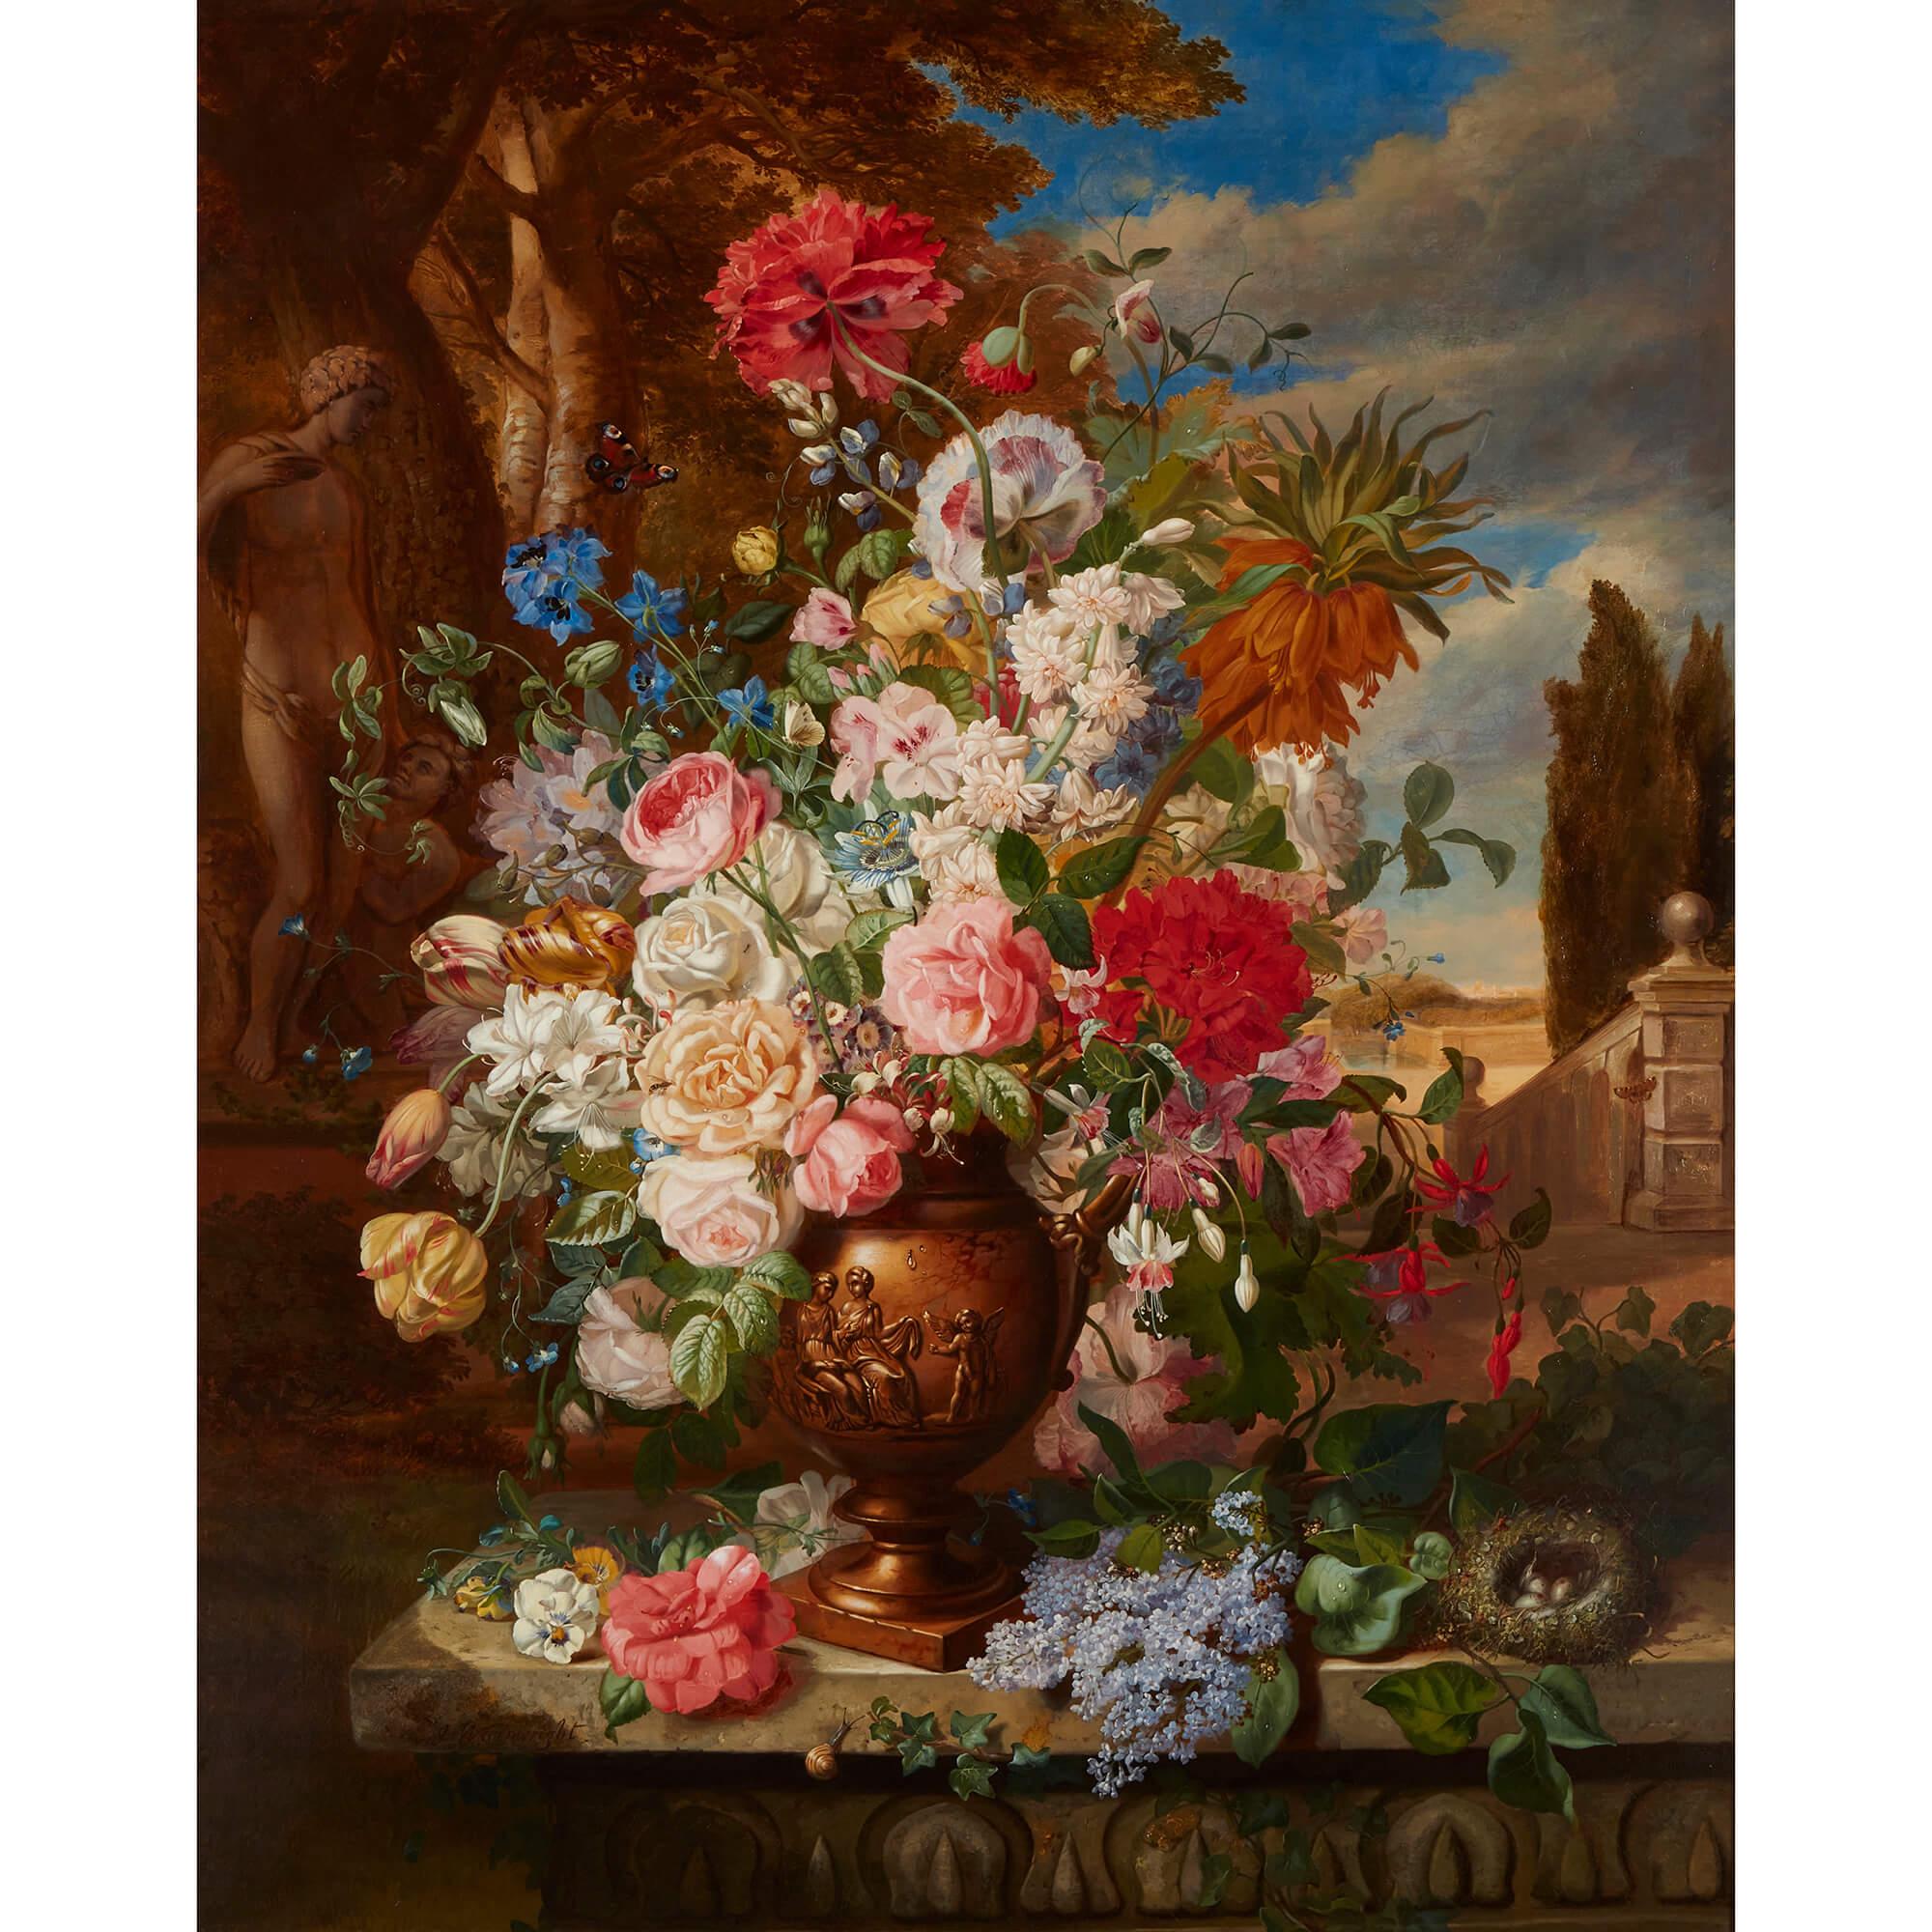 Antique Still Life of Flowers by W. J. Wainwright  - Painting by William John Wainwright 